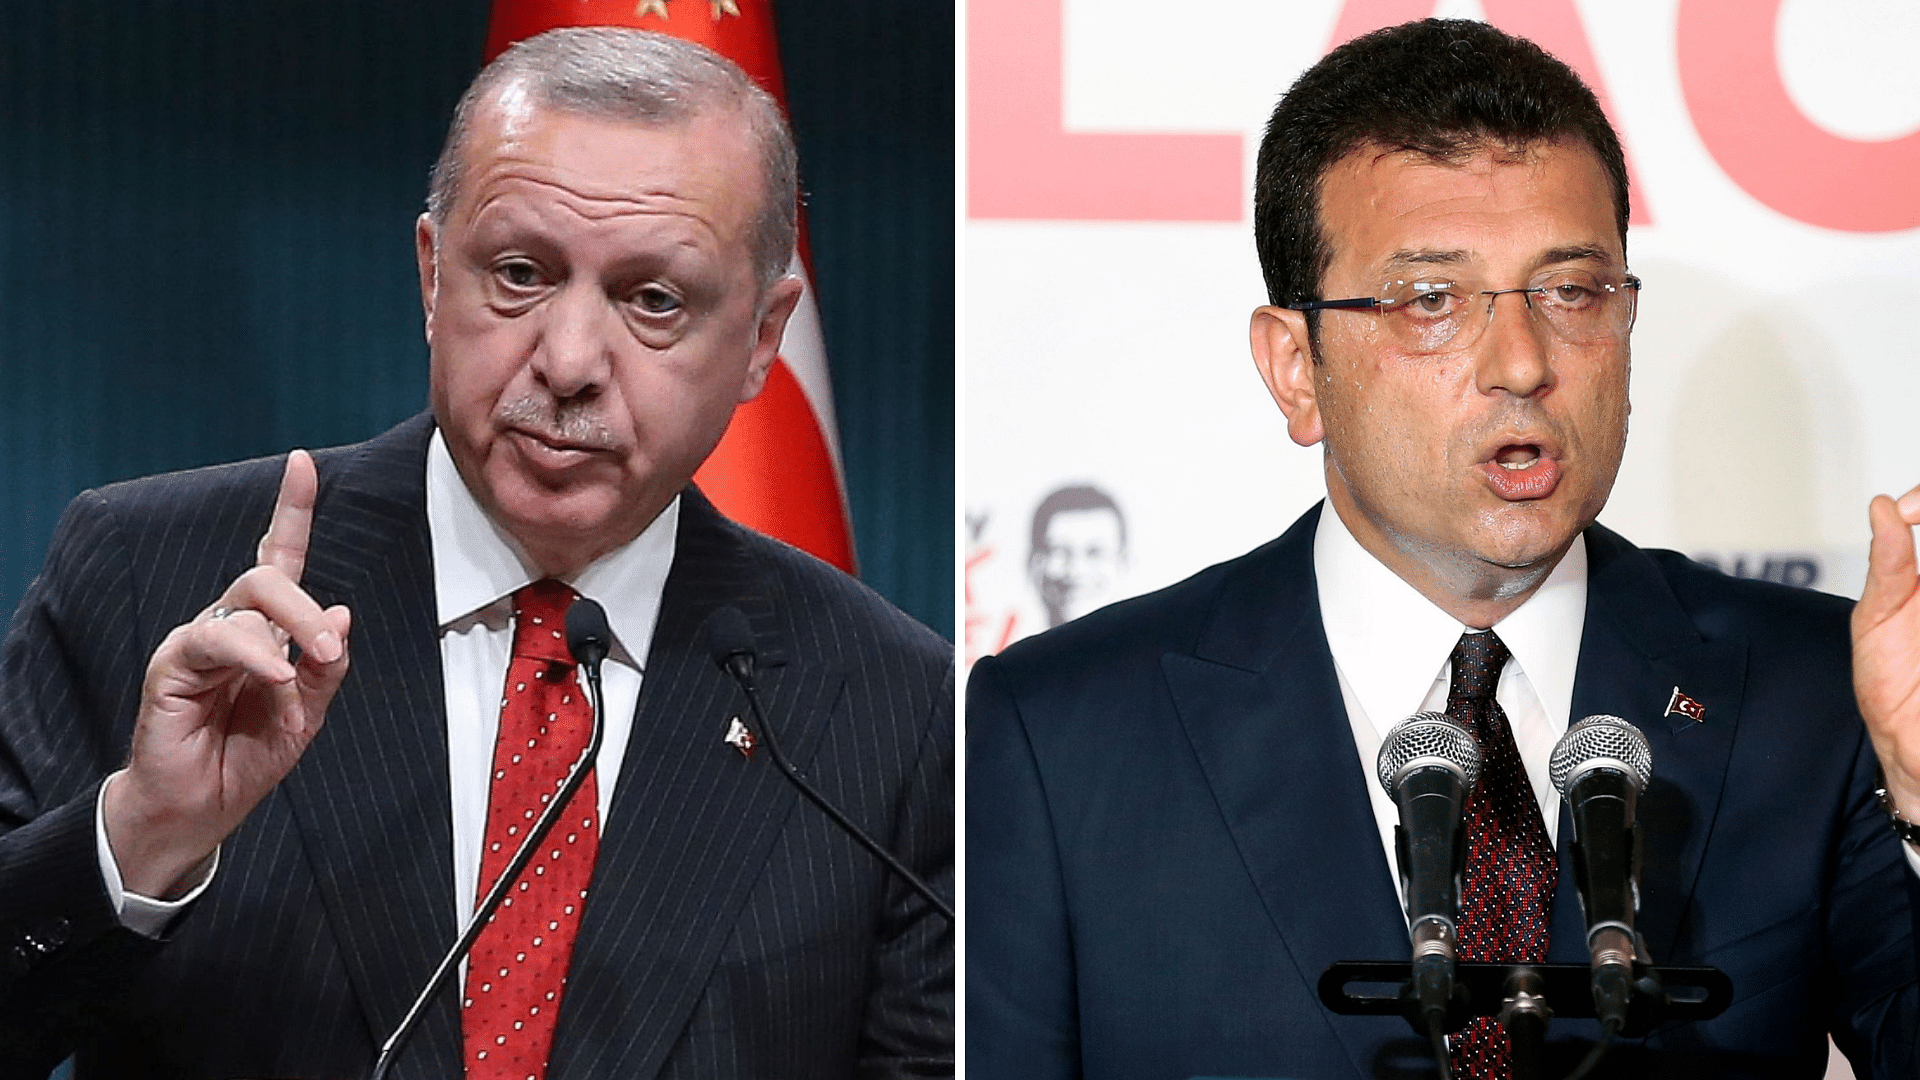 In a blow to Turkish President Recep Tayyip Erdogan, an opposition candidate, Ekrem Imamoglu declared victory in the Istanbul mayor’s race.